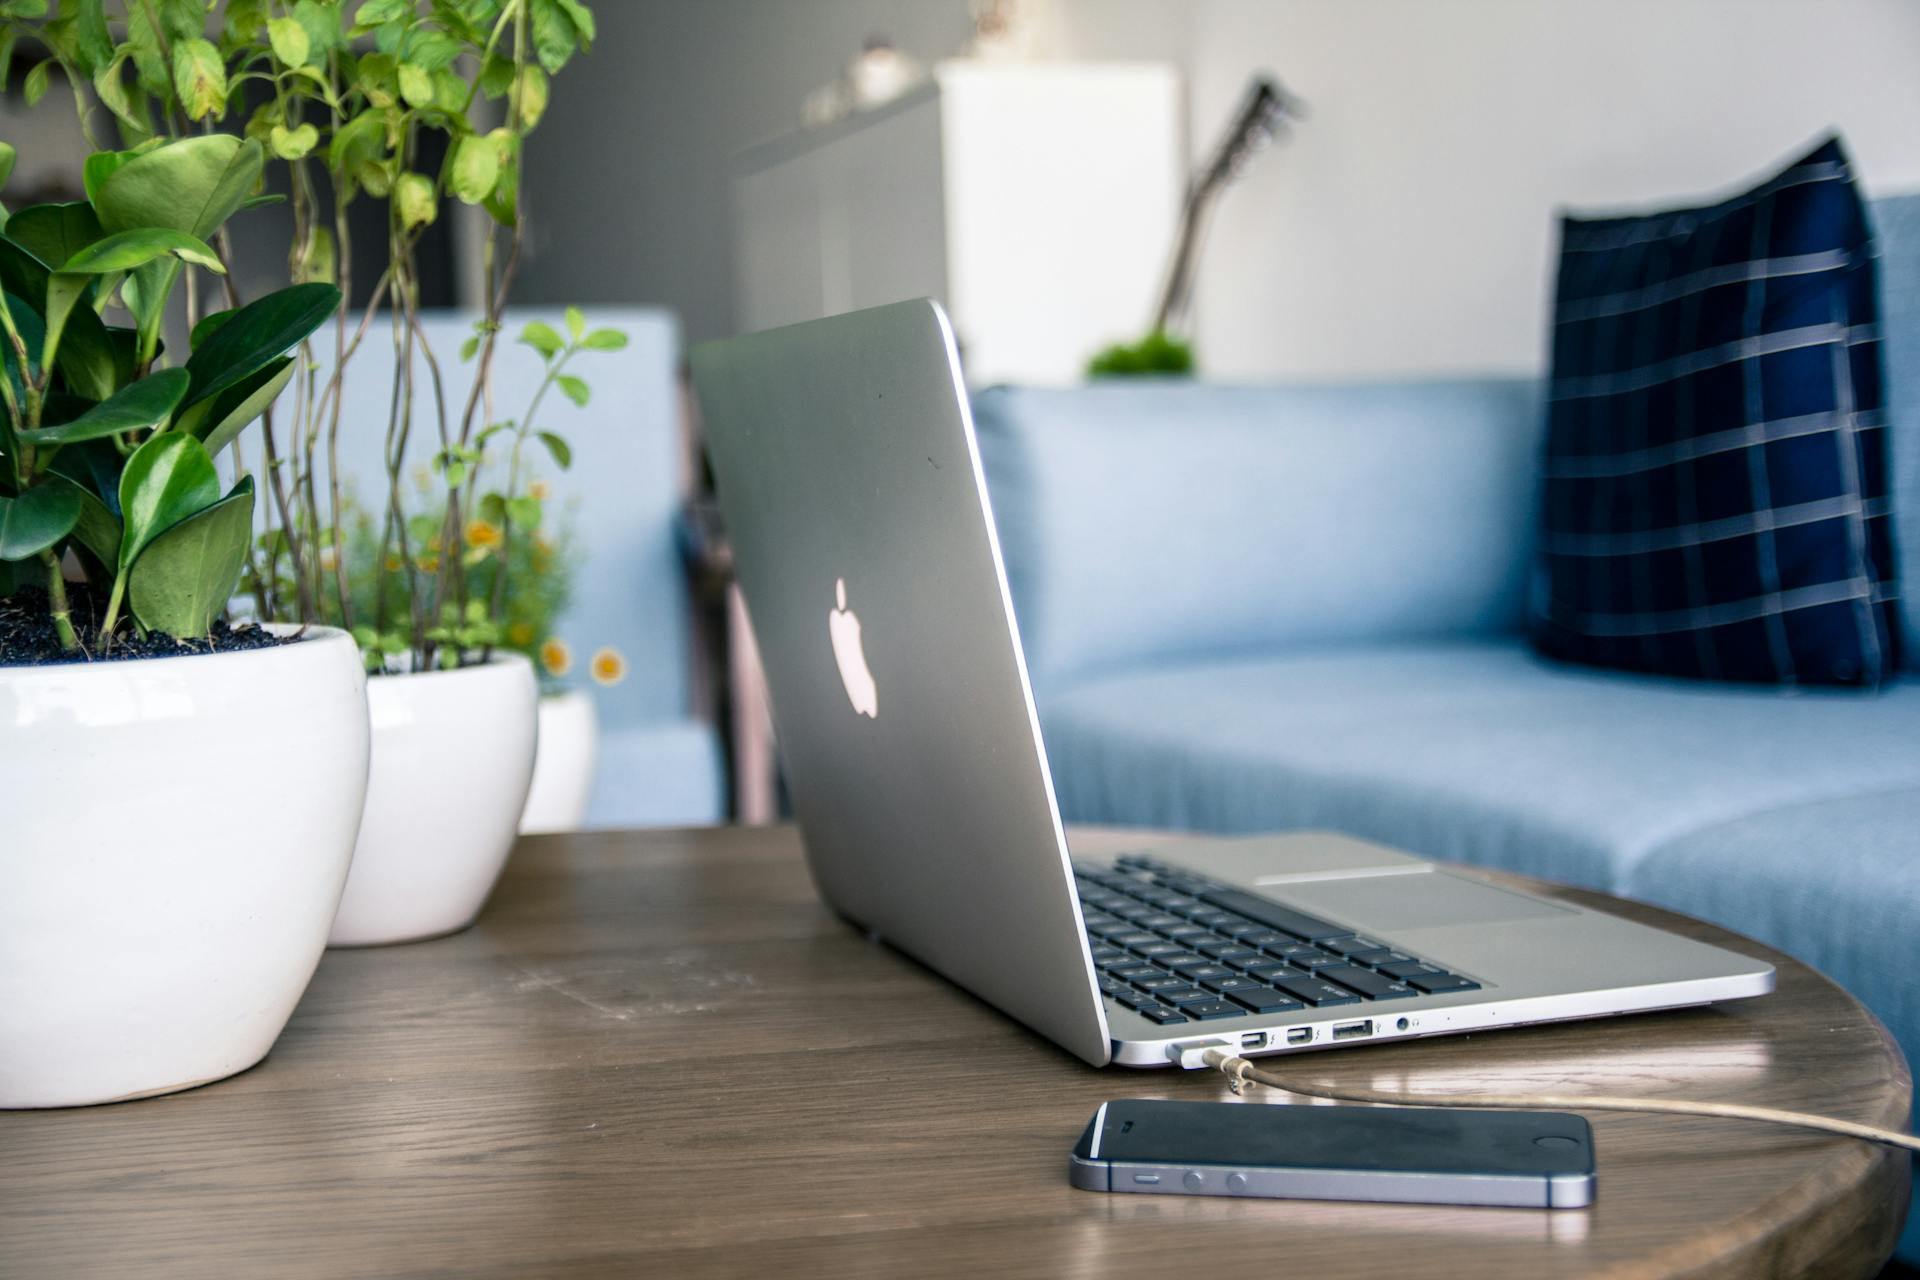 A MacBook on a table | Source: Pexels